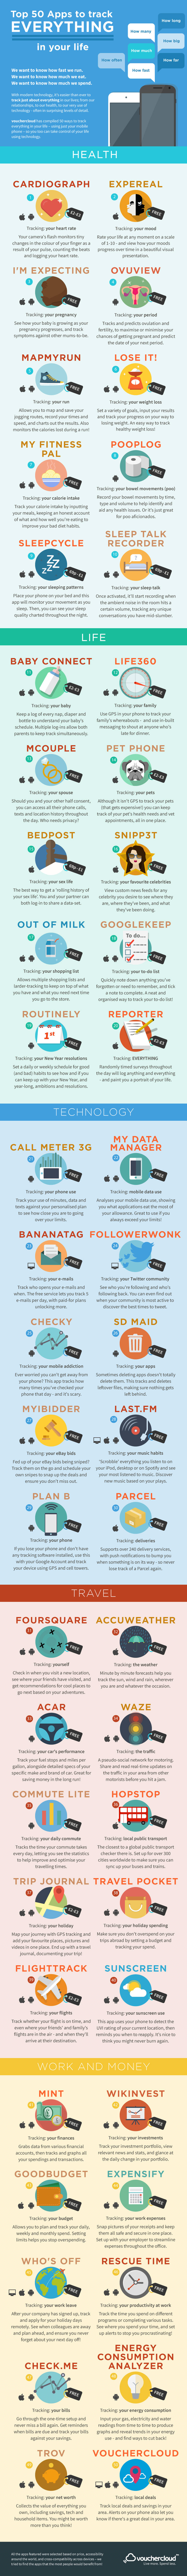 Email_instant_50_Apps_to_Track_Everything_infographic